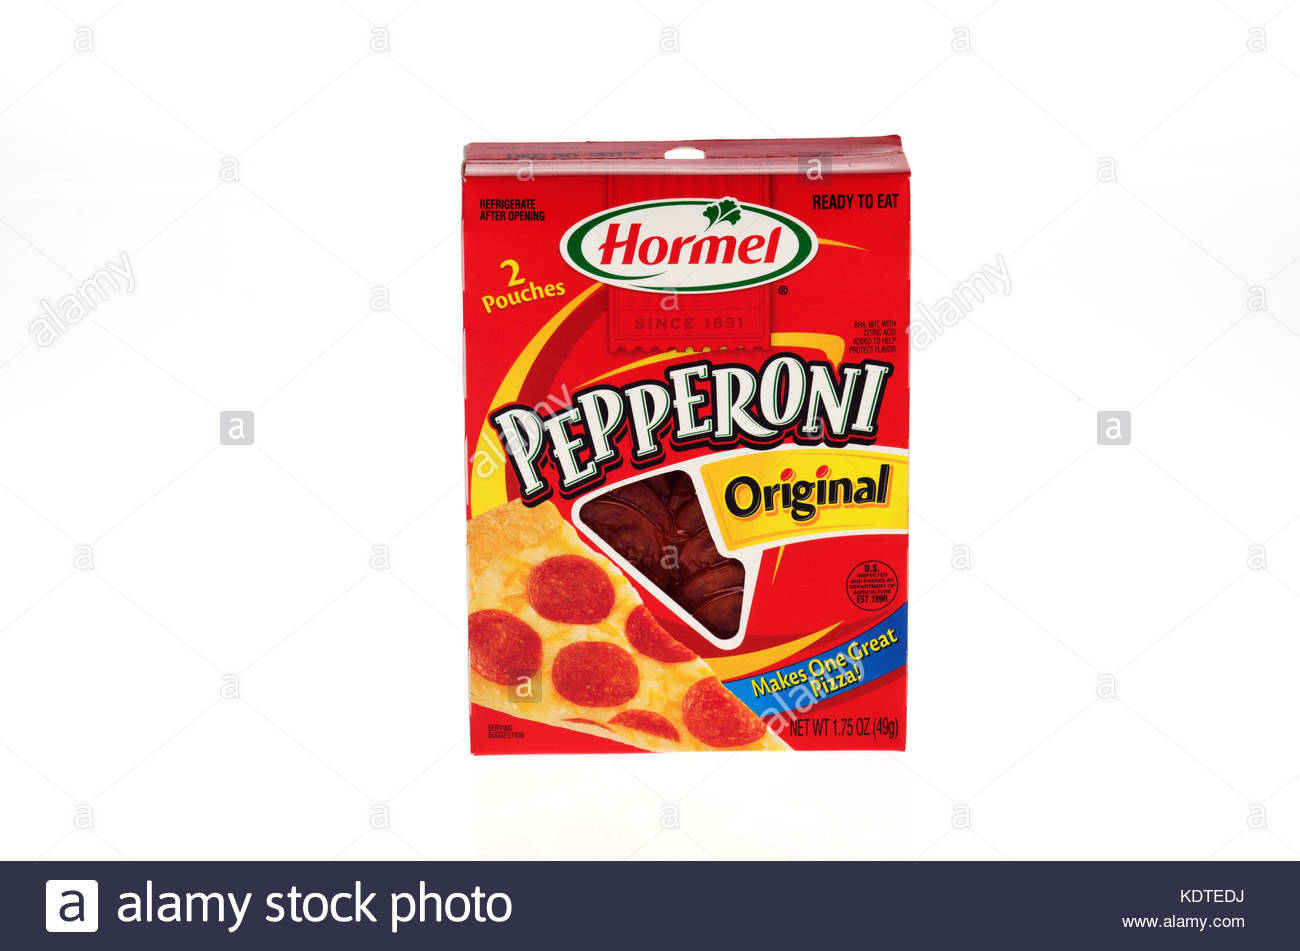 Unopened Package Of The Original Hormel Pepperoni On White Stock